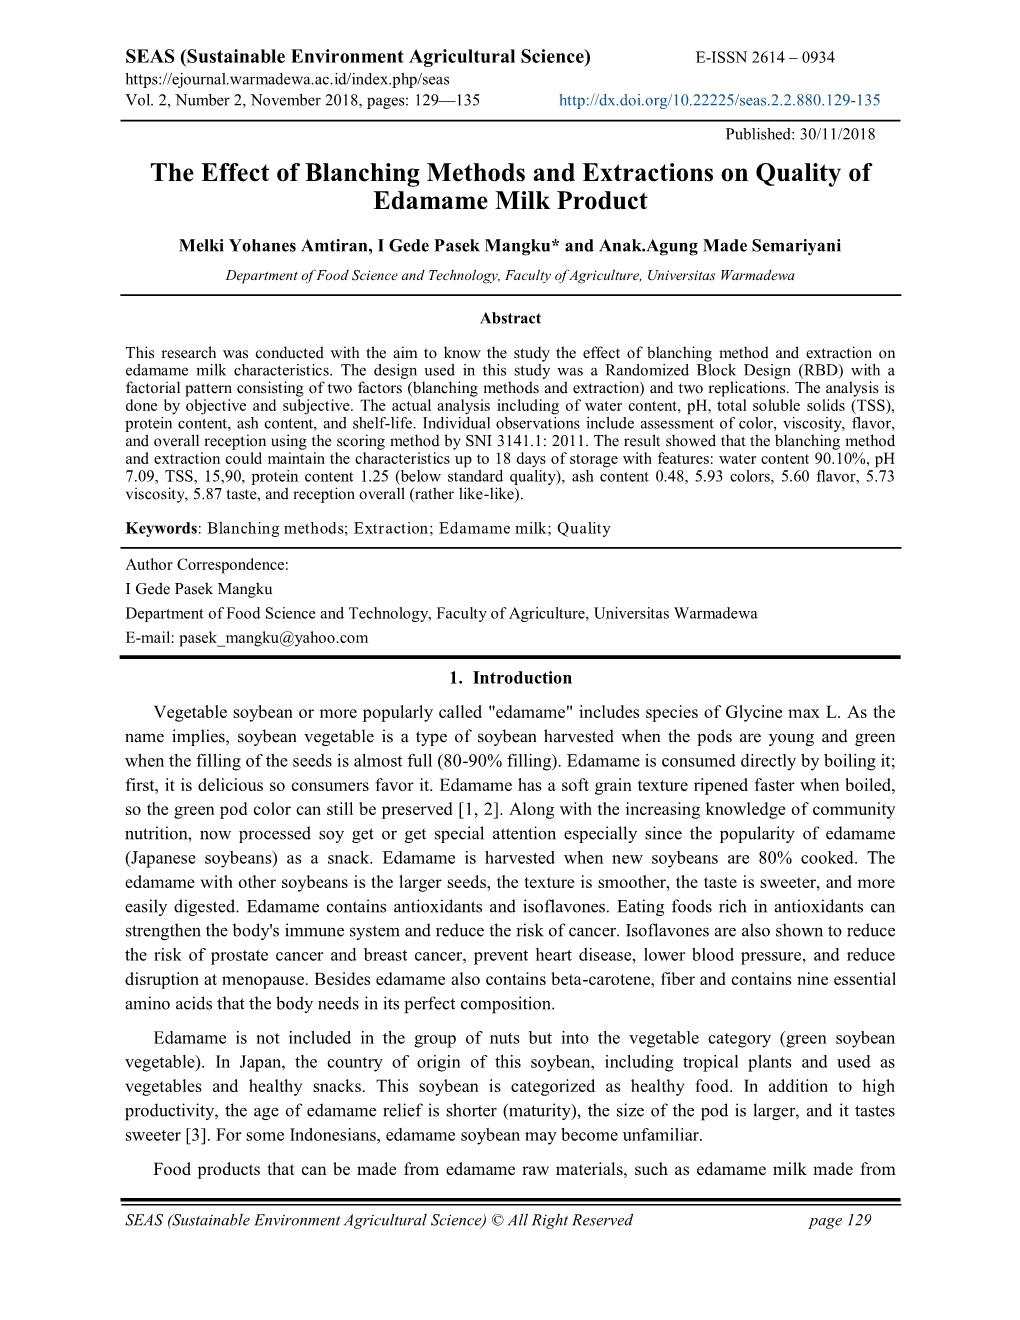 The Effect of Blanching Methods and Extractions on Quality of Edamame Milk Product